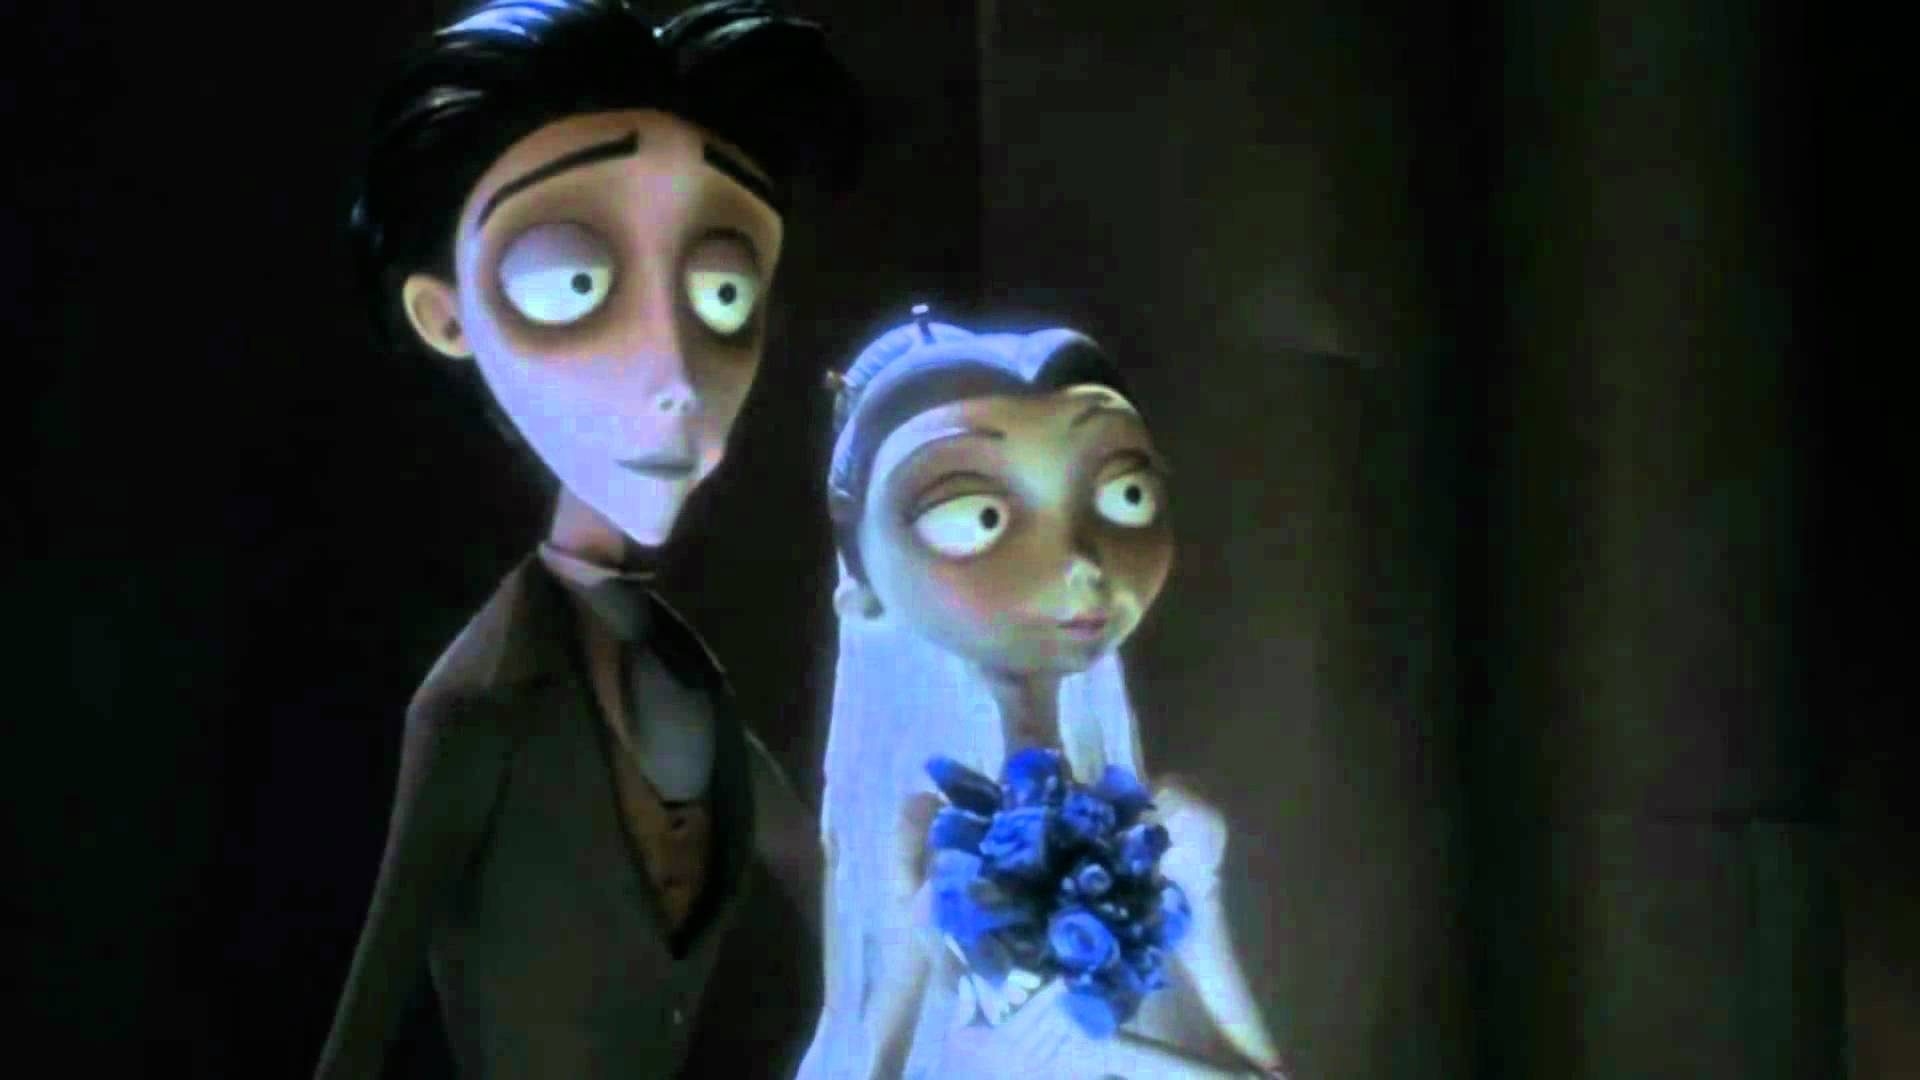 Images of Corpse Bride | 1920x1080